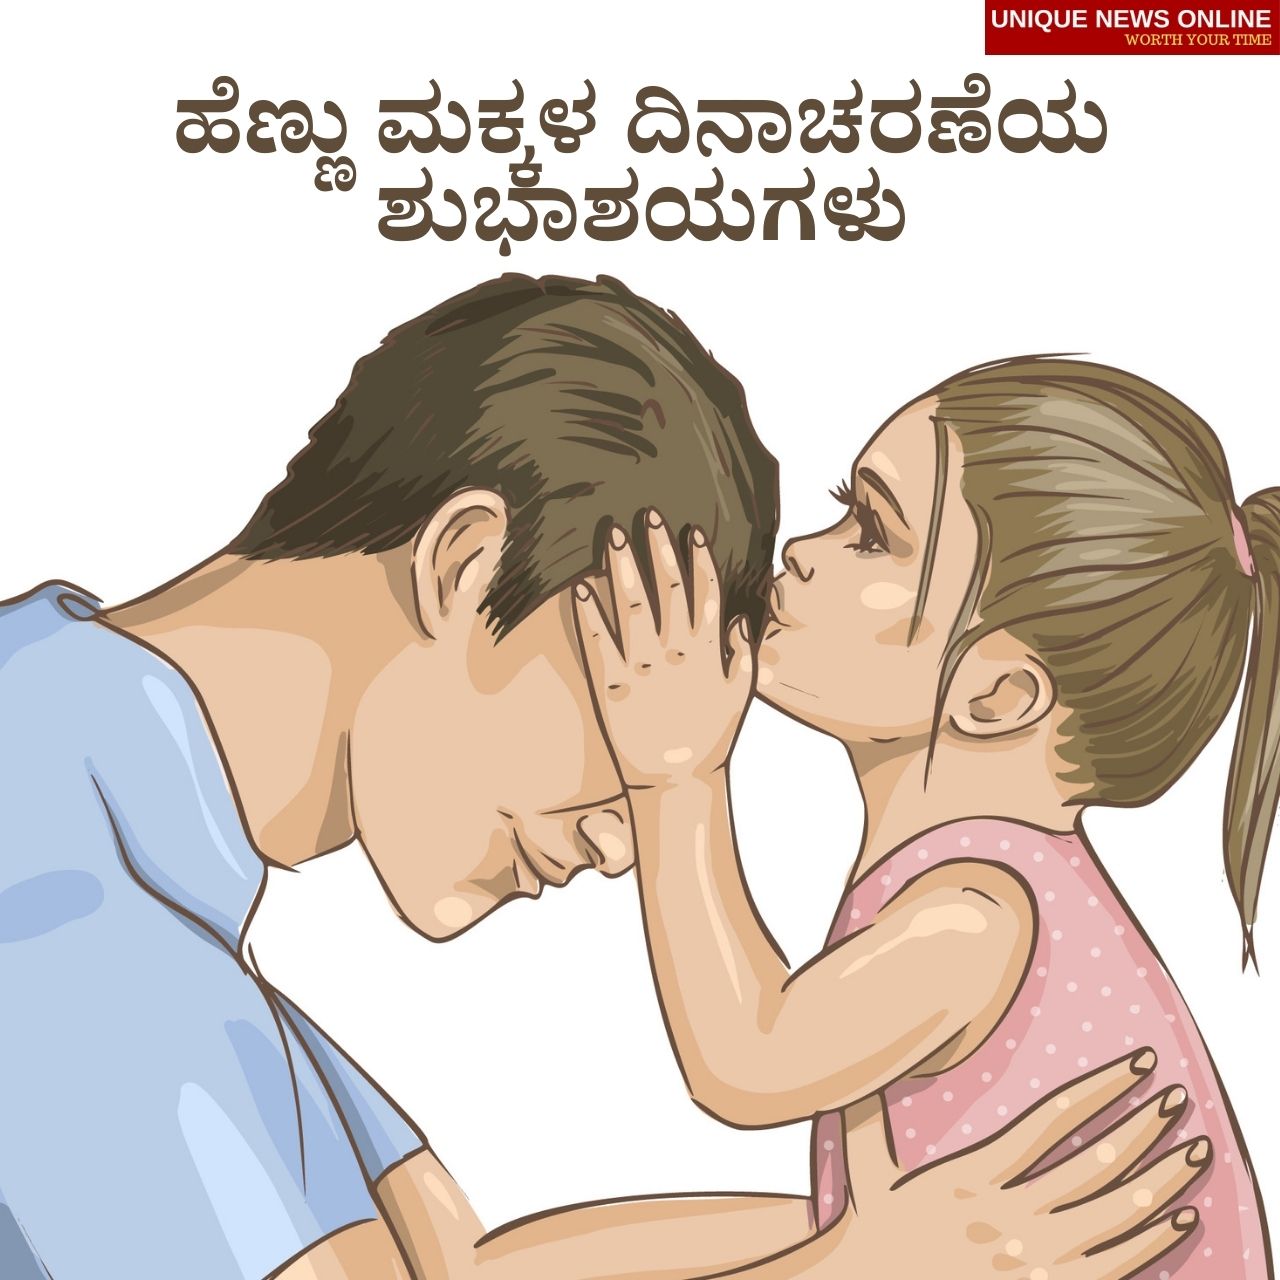 Happy Daughters Day 2021 Kannada Wishes, Greetings, Messages, Shayari, Quotes, and HD Images to Share